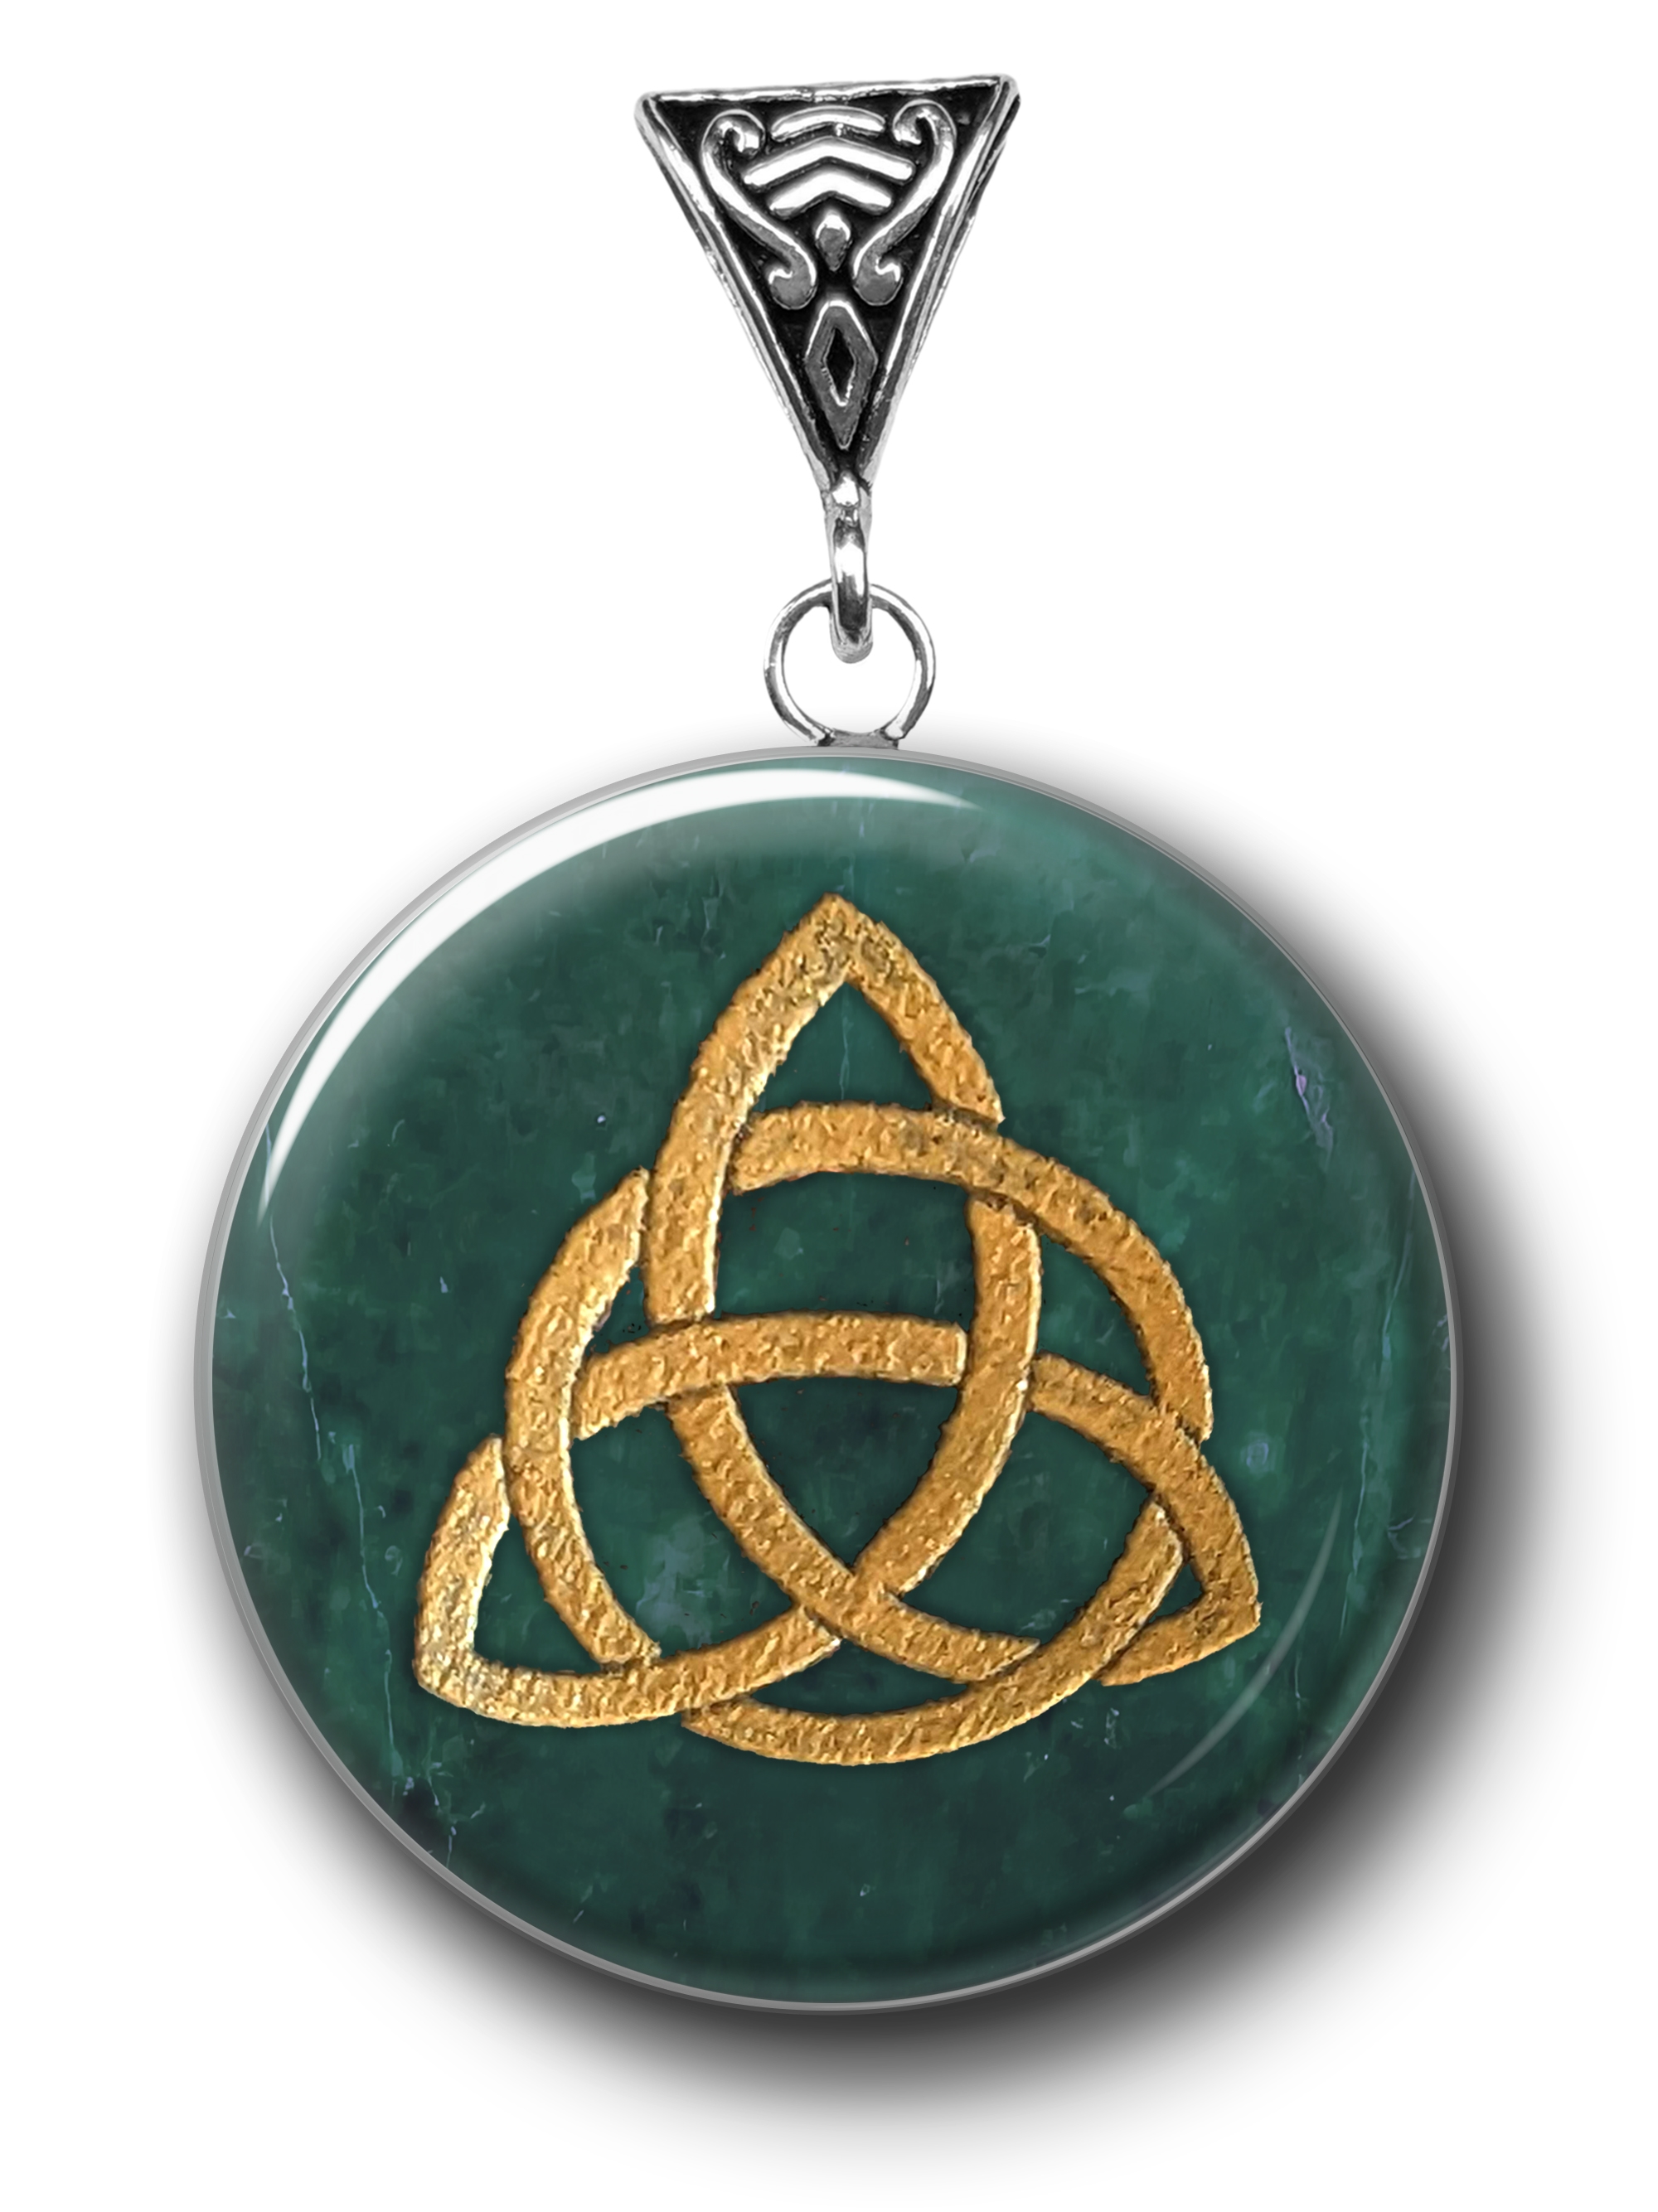 TRIQUETRA SYMBOLOGY ON JADE FOR HARMONY